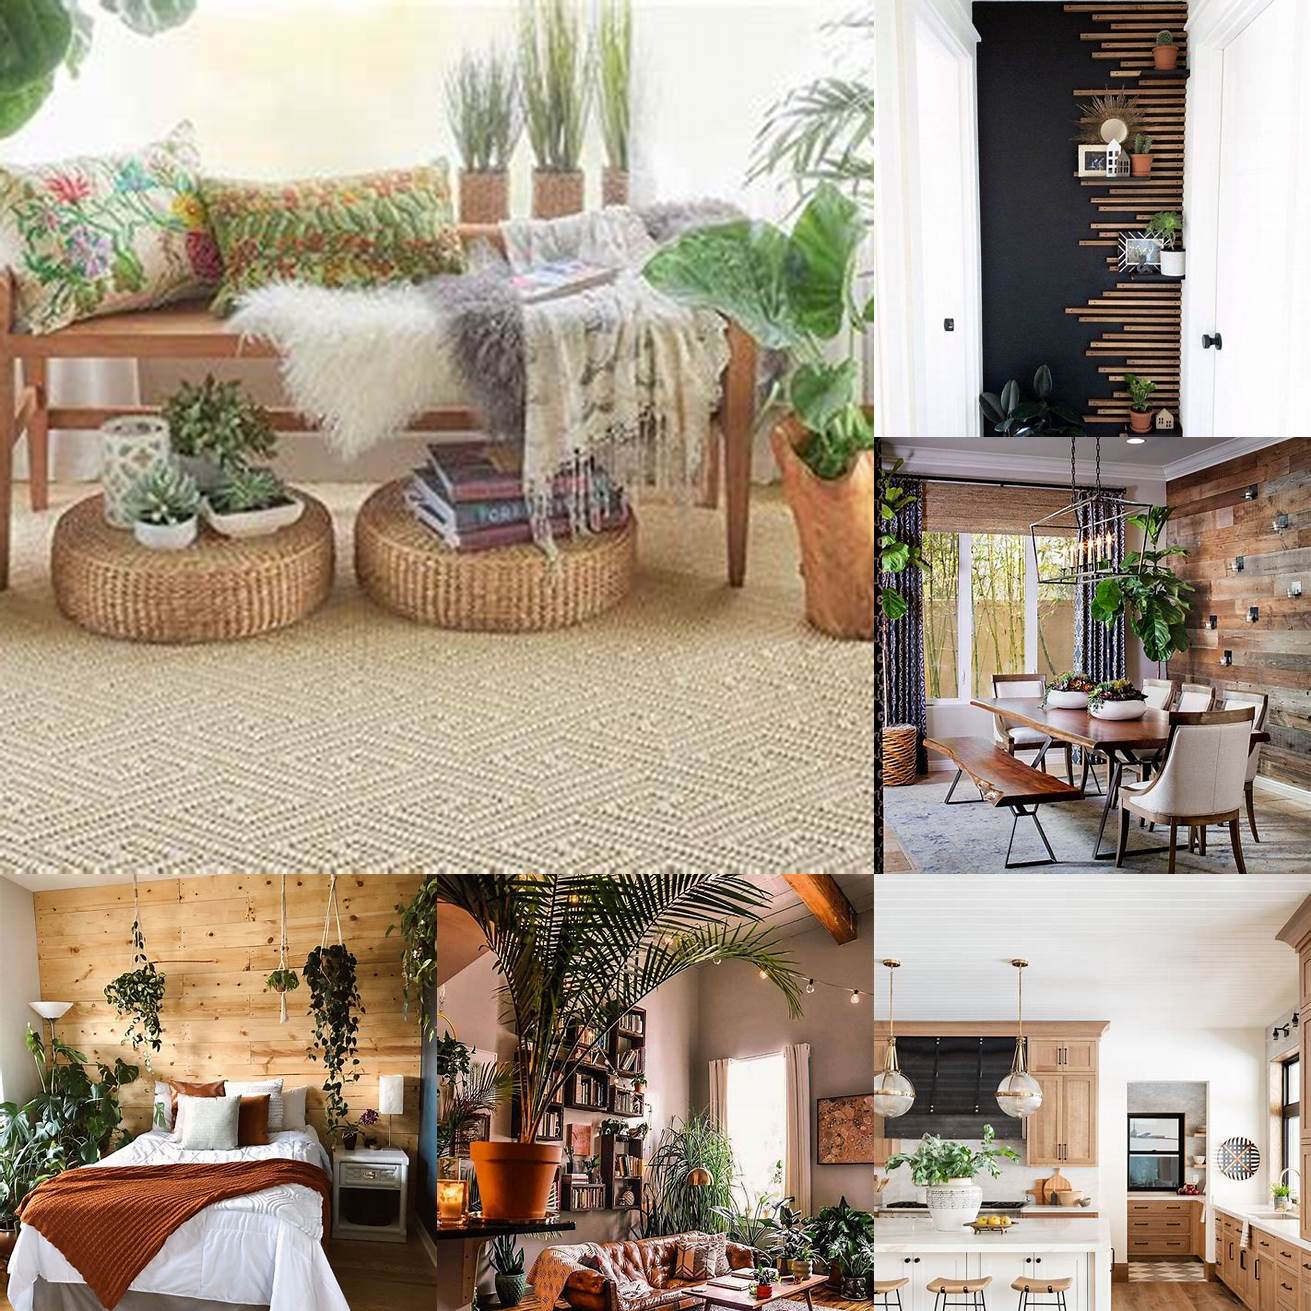 5 Add natural elements with plants and wood accents